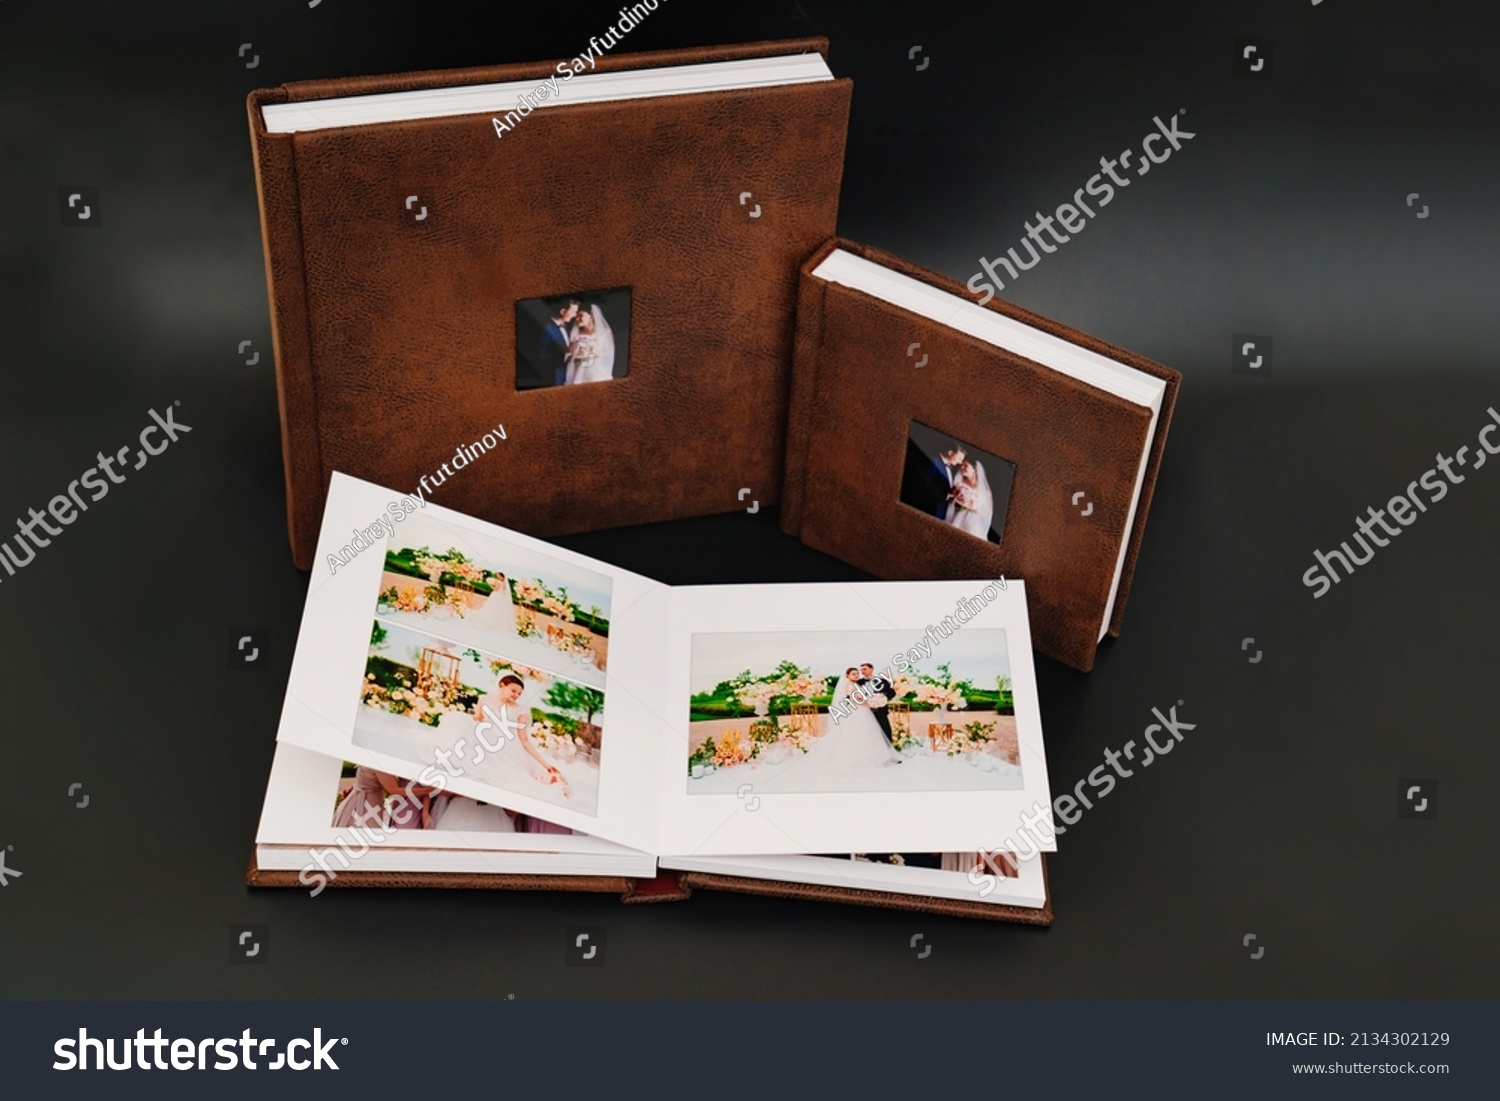 wedding photobooks in brown leather binding with photos on the cover. high-quality and expensive photo and printing products. services of a professional photographer and designer. on black background #2134302129